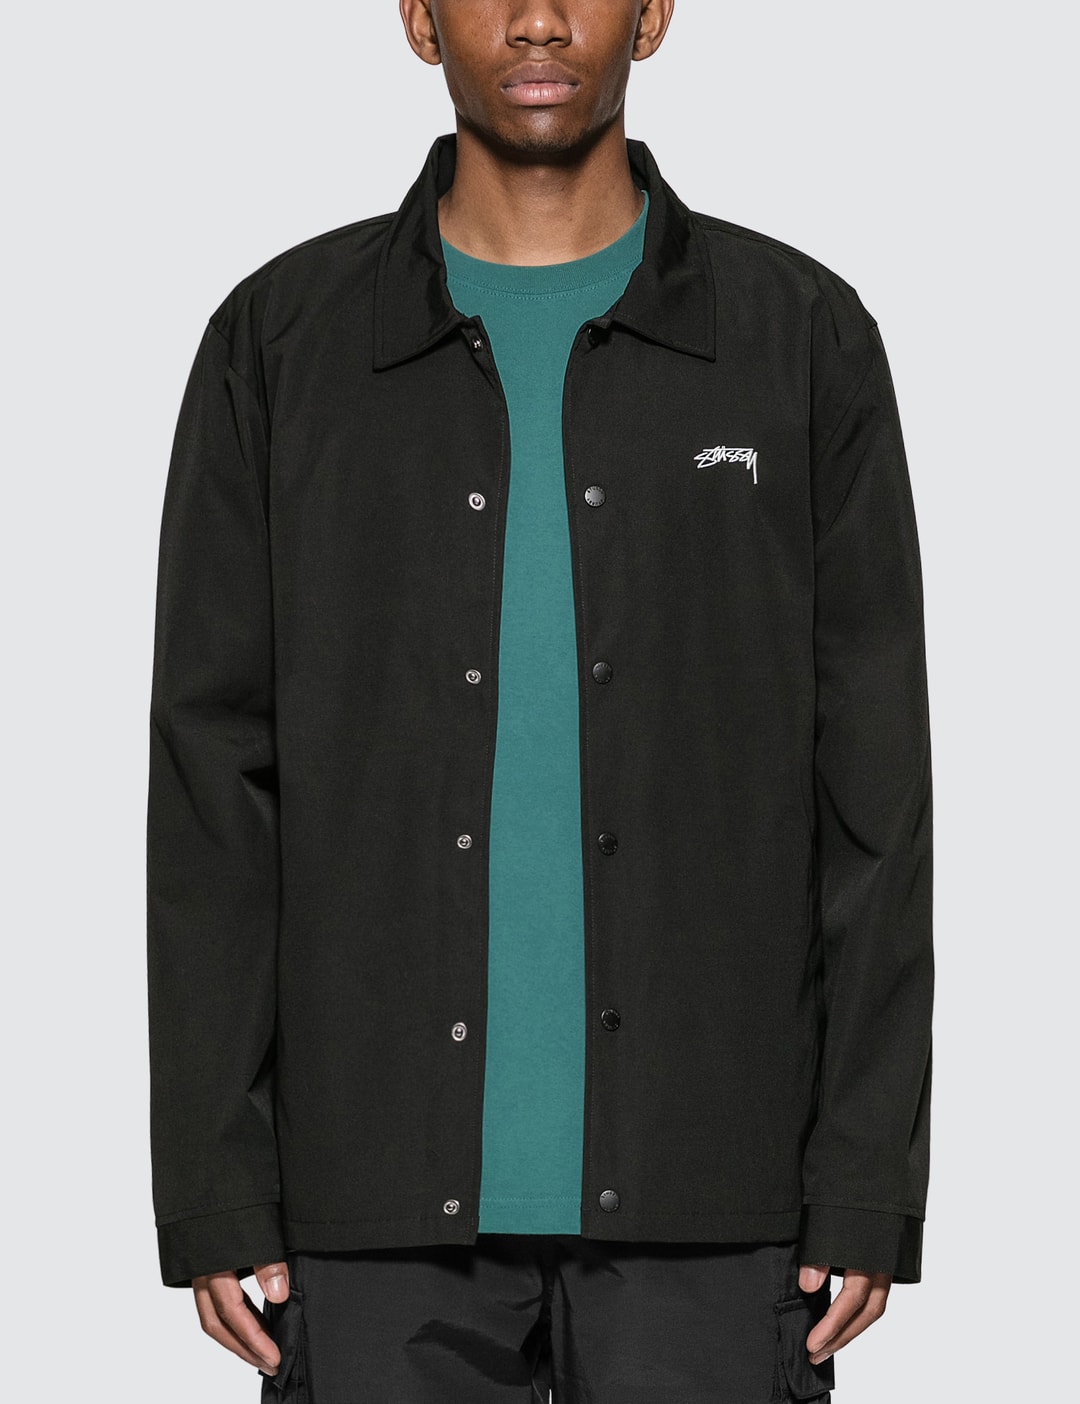 Stüssy - Coach Jacket | HBX - Globally Curated Fashion and Lifestyle Hypebeast